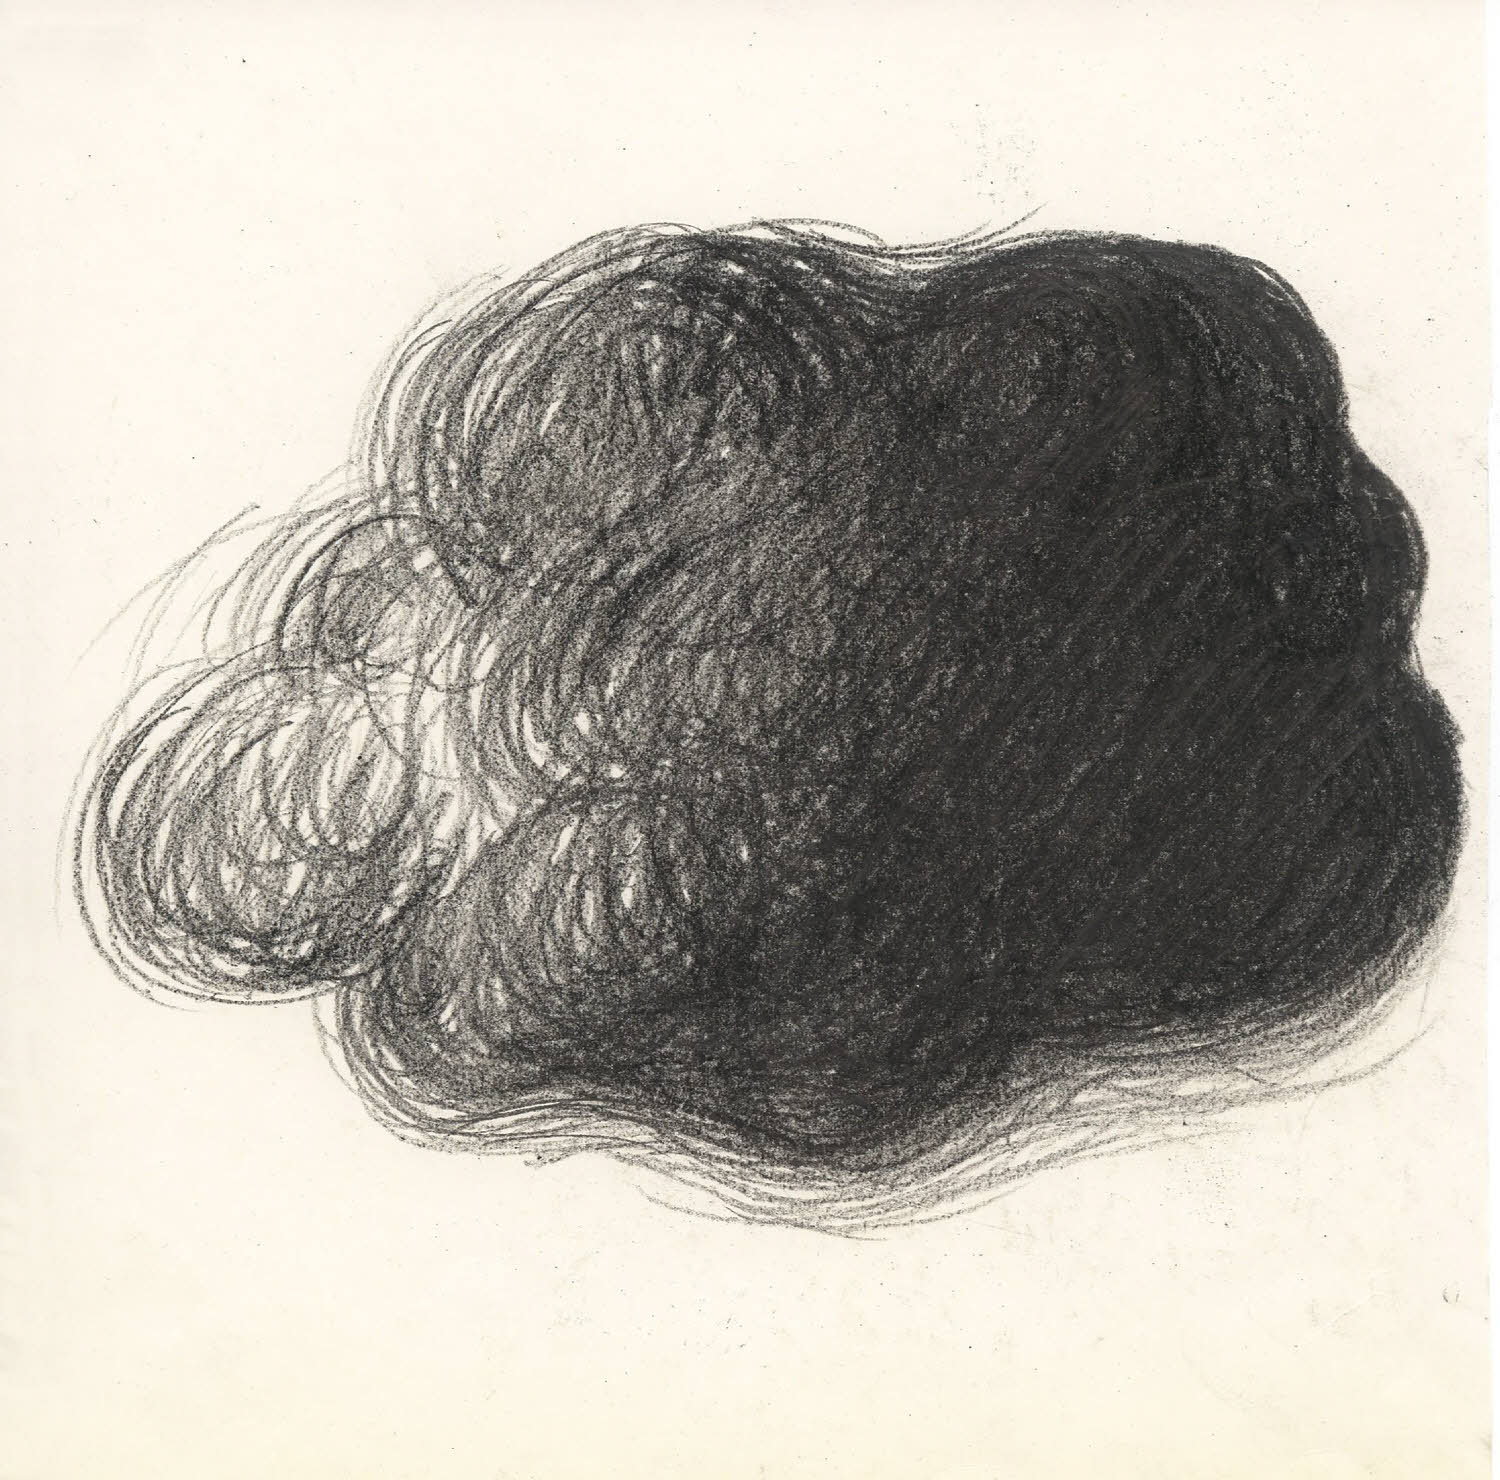 Blur, 2005, graphite on texture paper, 7.5x7.5 inches